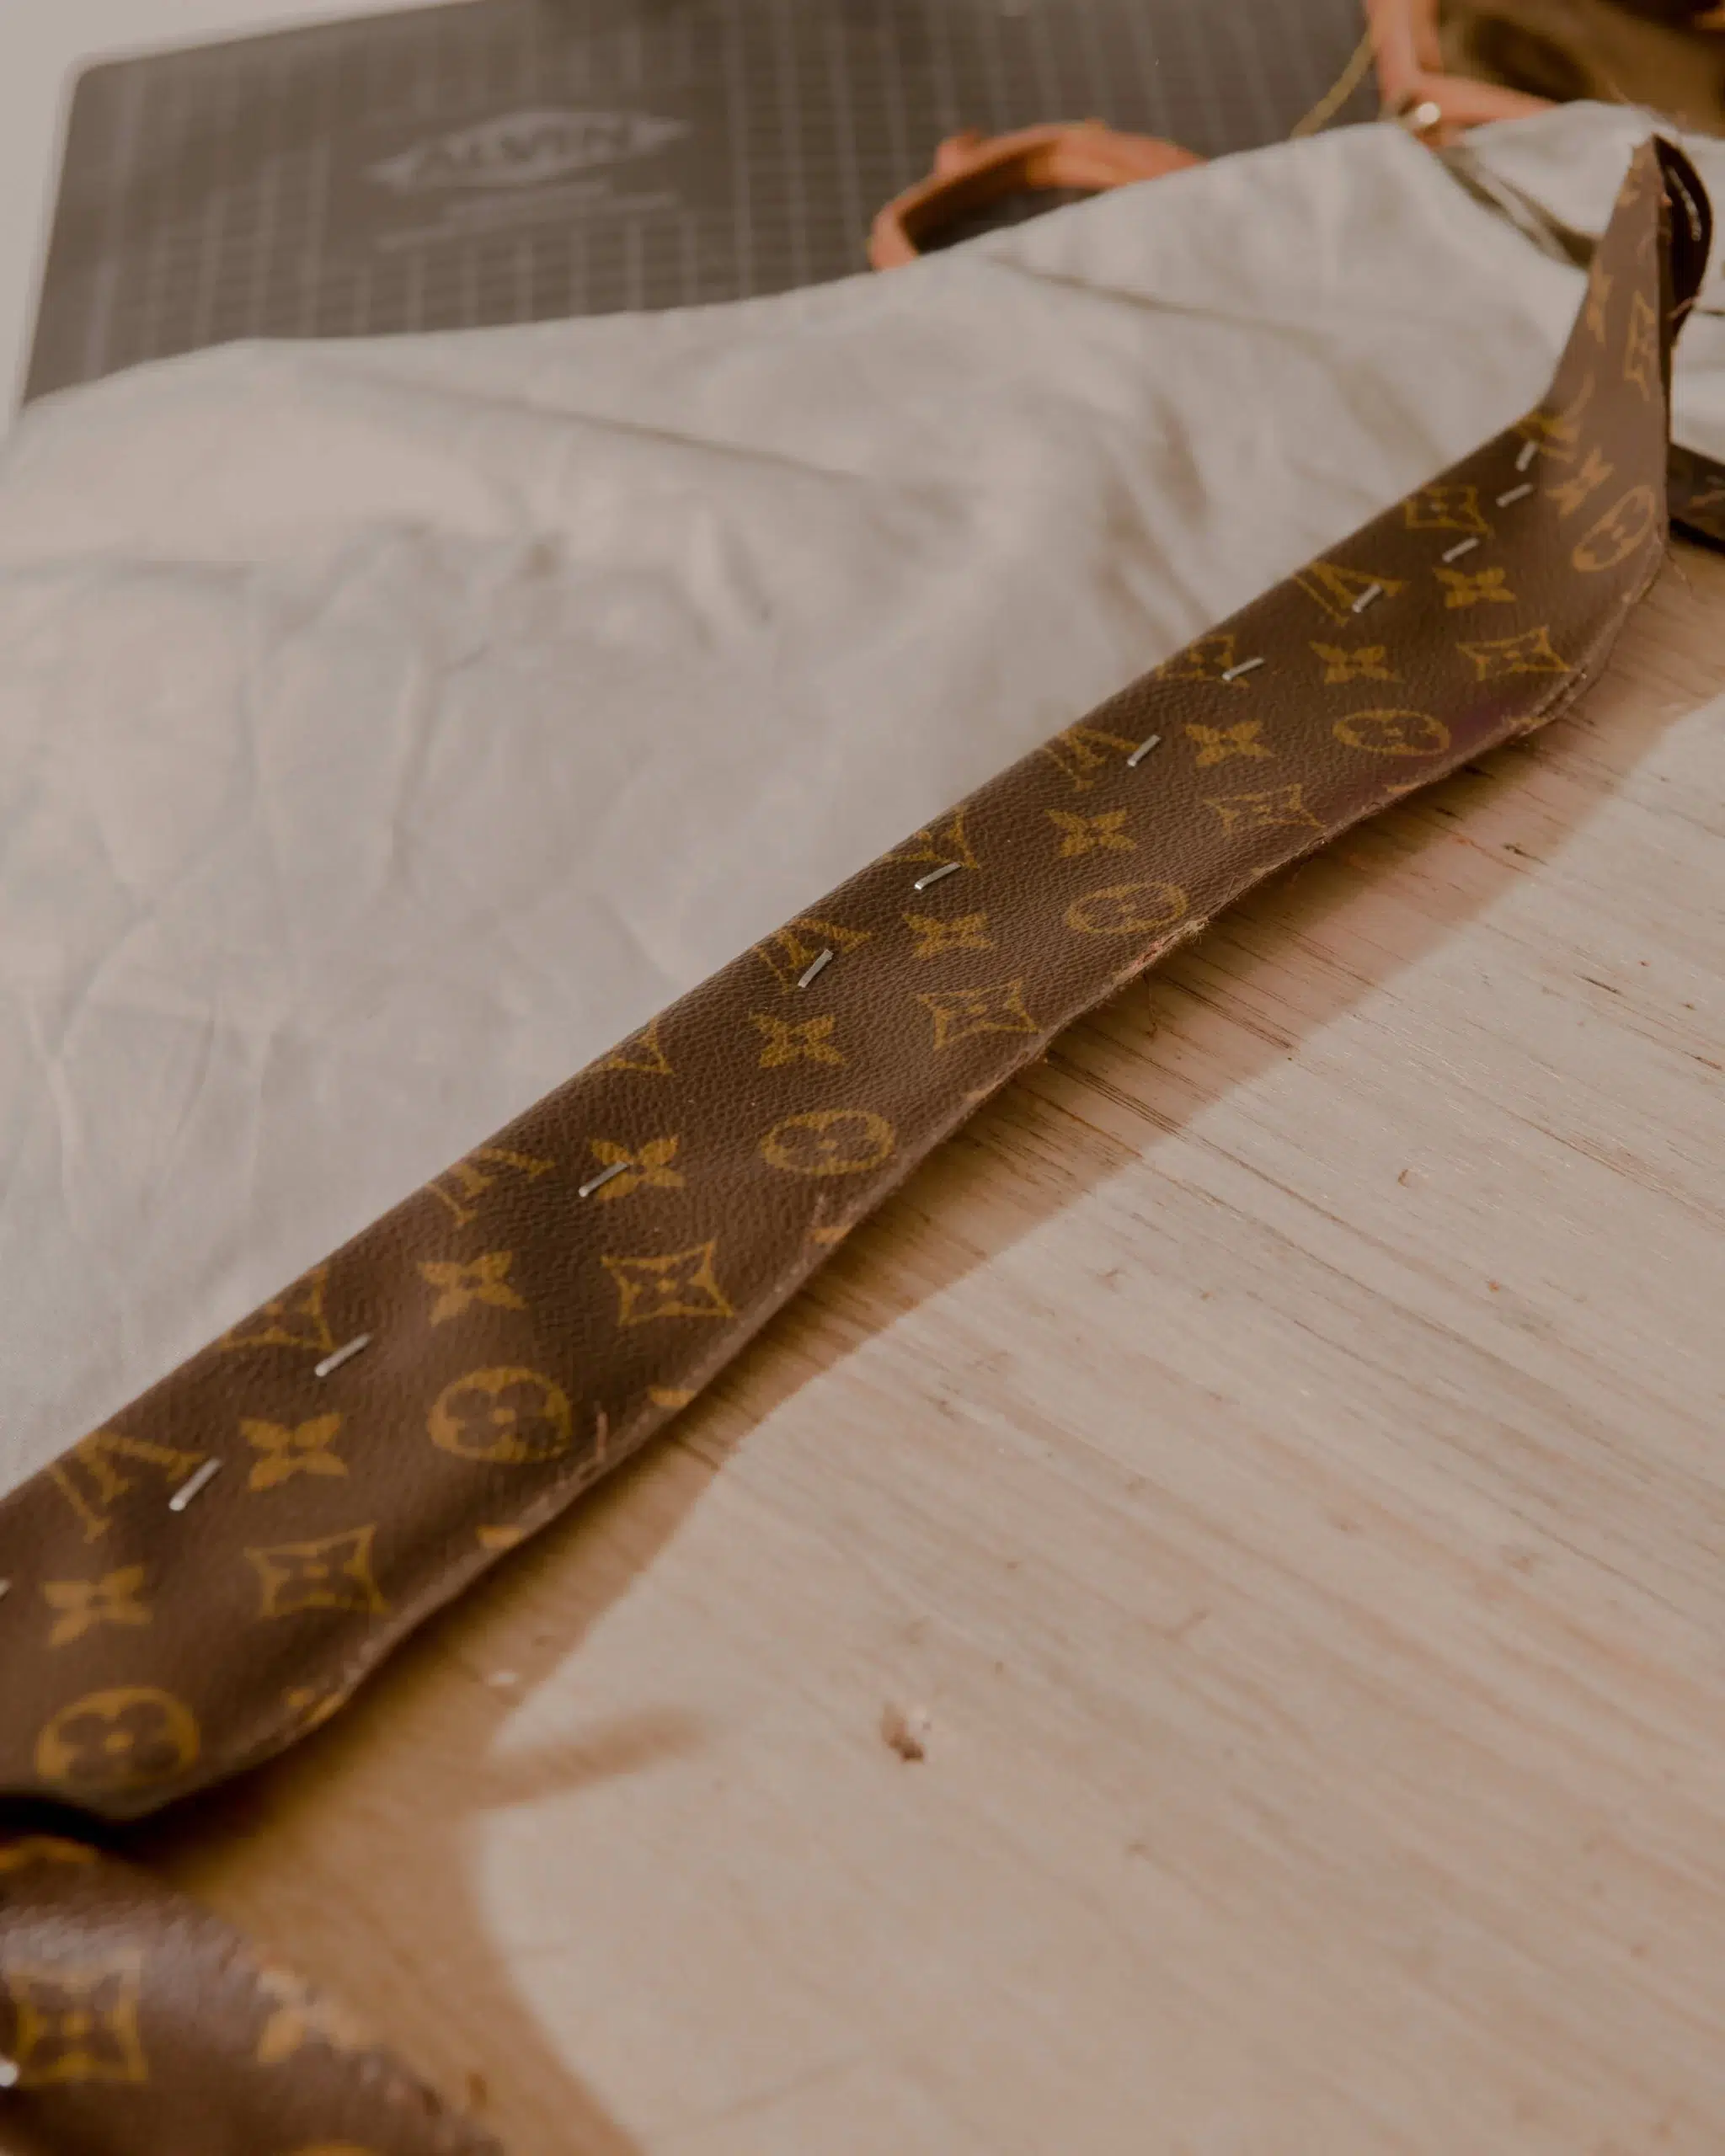 A designer Hoop bag by Louis Vuitton elegantly placed on a table.